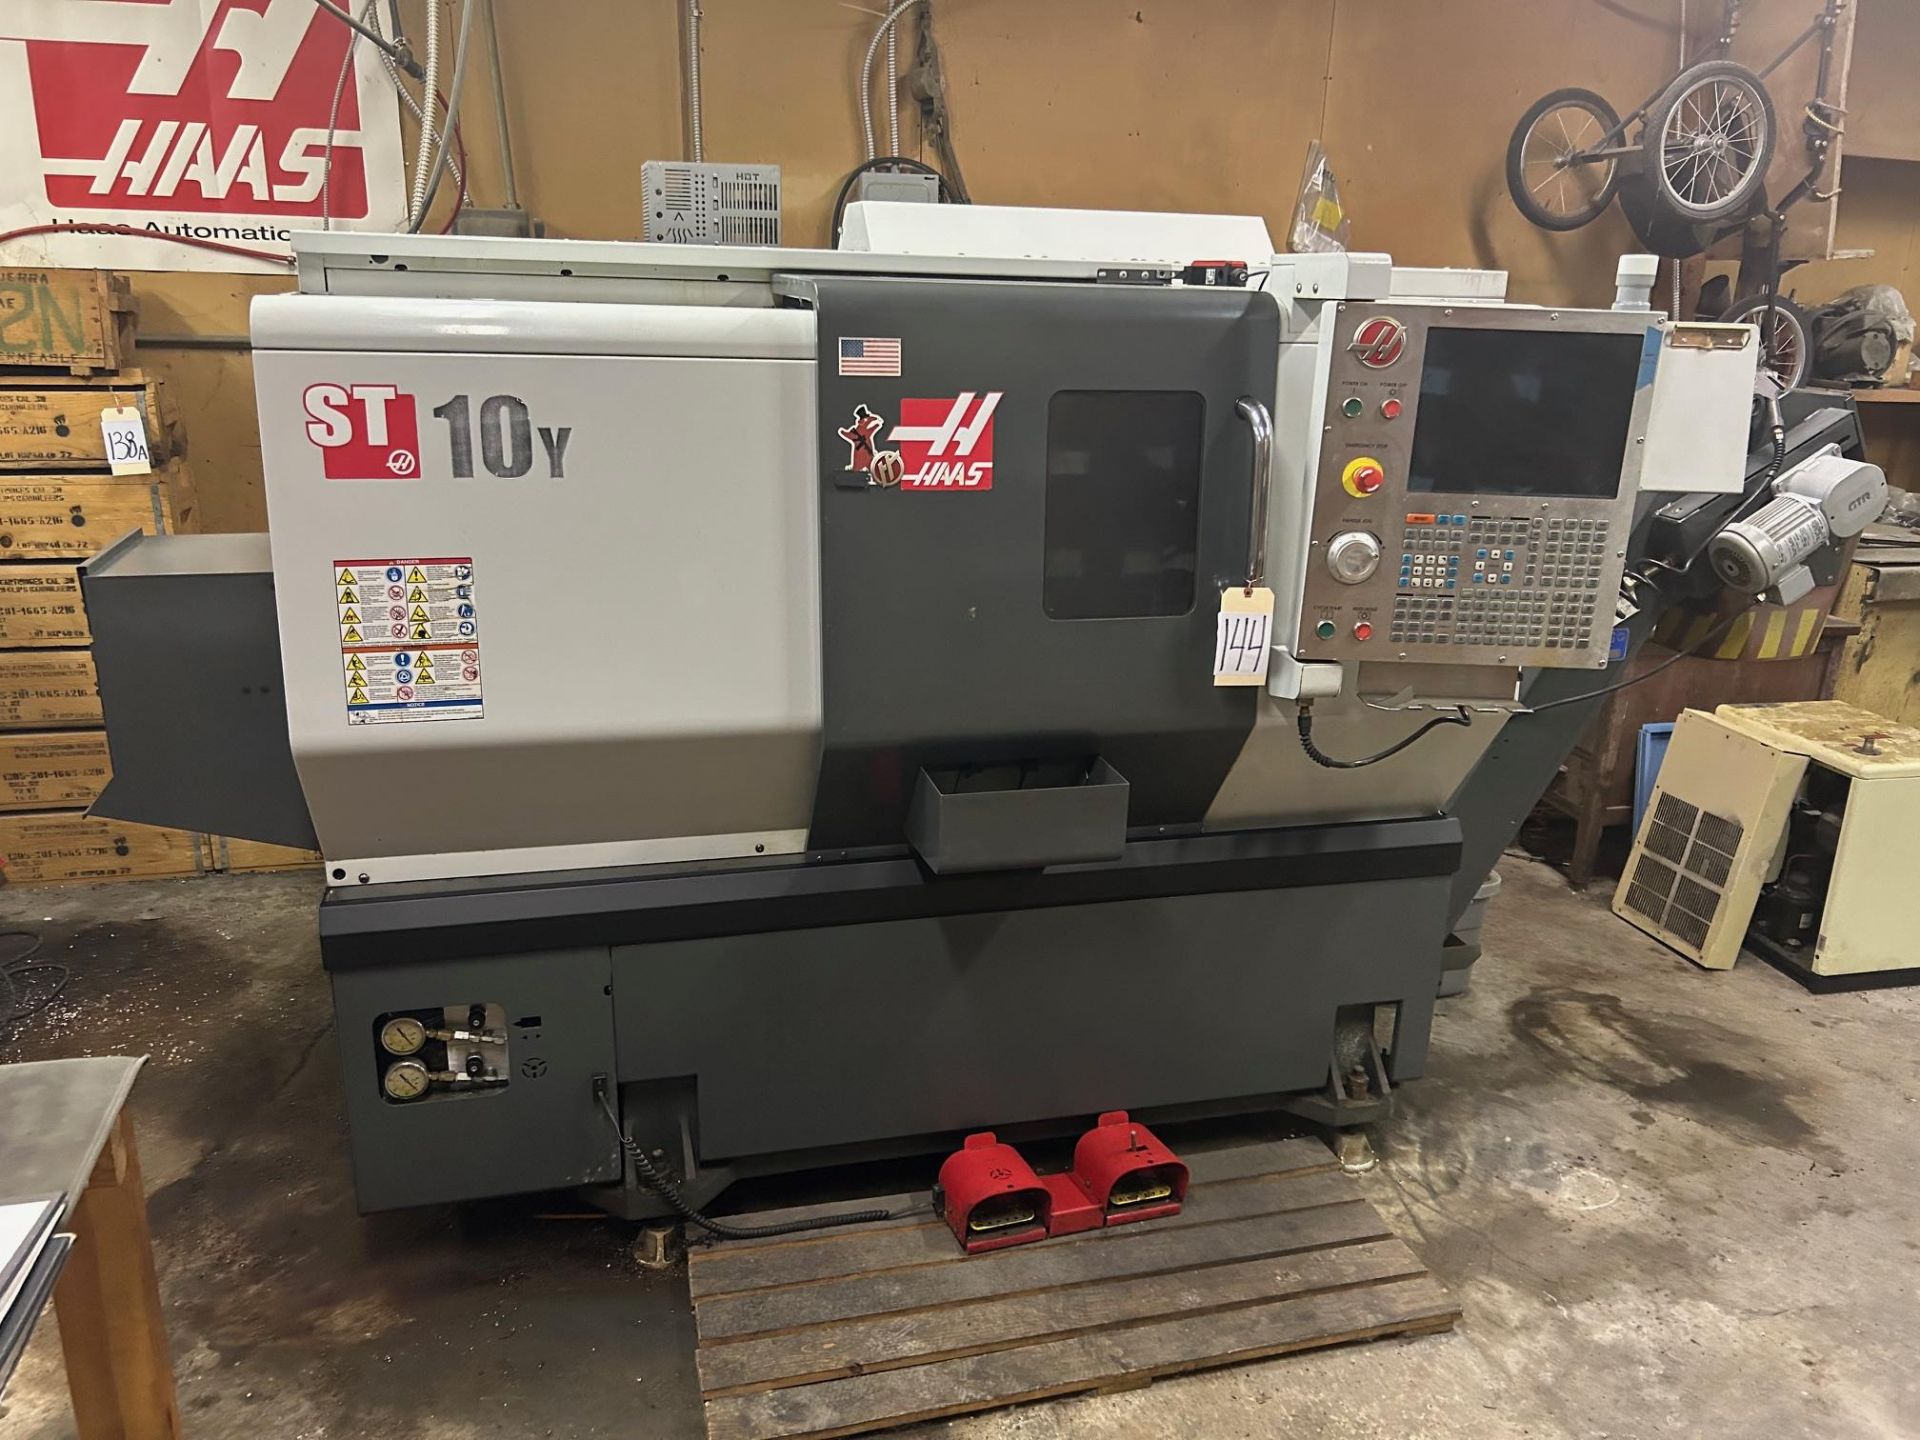 Haas ST-10Y CNC Lathe, (2013) SN: 3095763, Live Tooling, Hennig Chip Conveyor, Model: 30-5494B, incl - Image 15 of 32